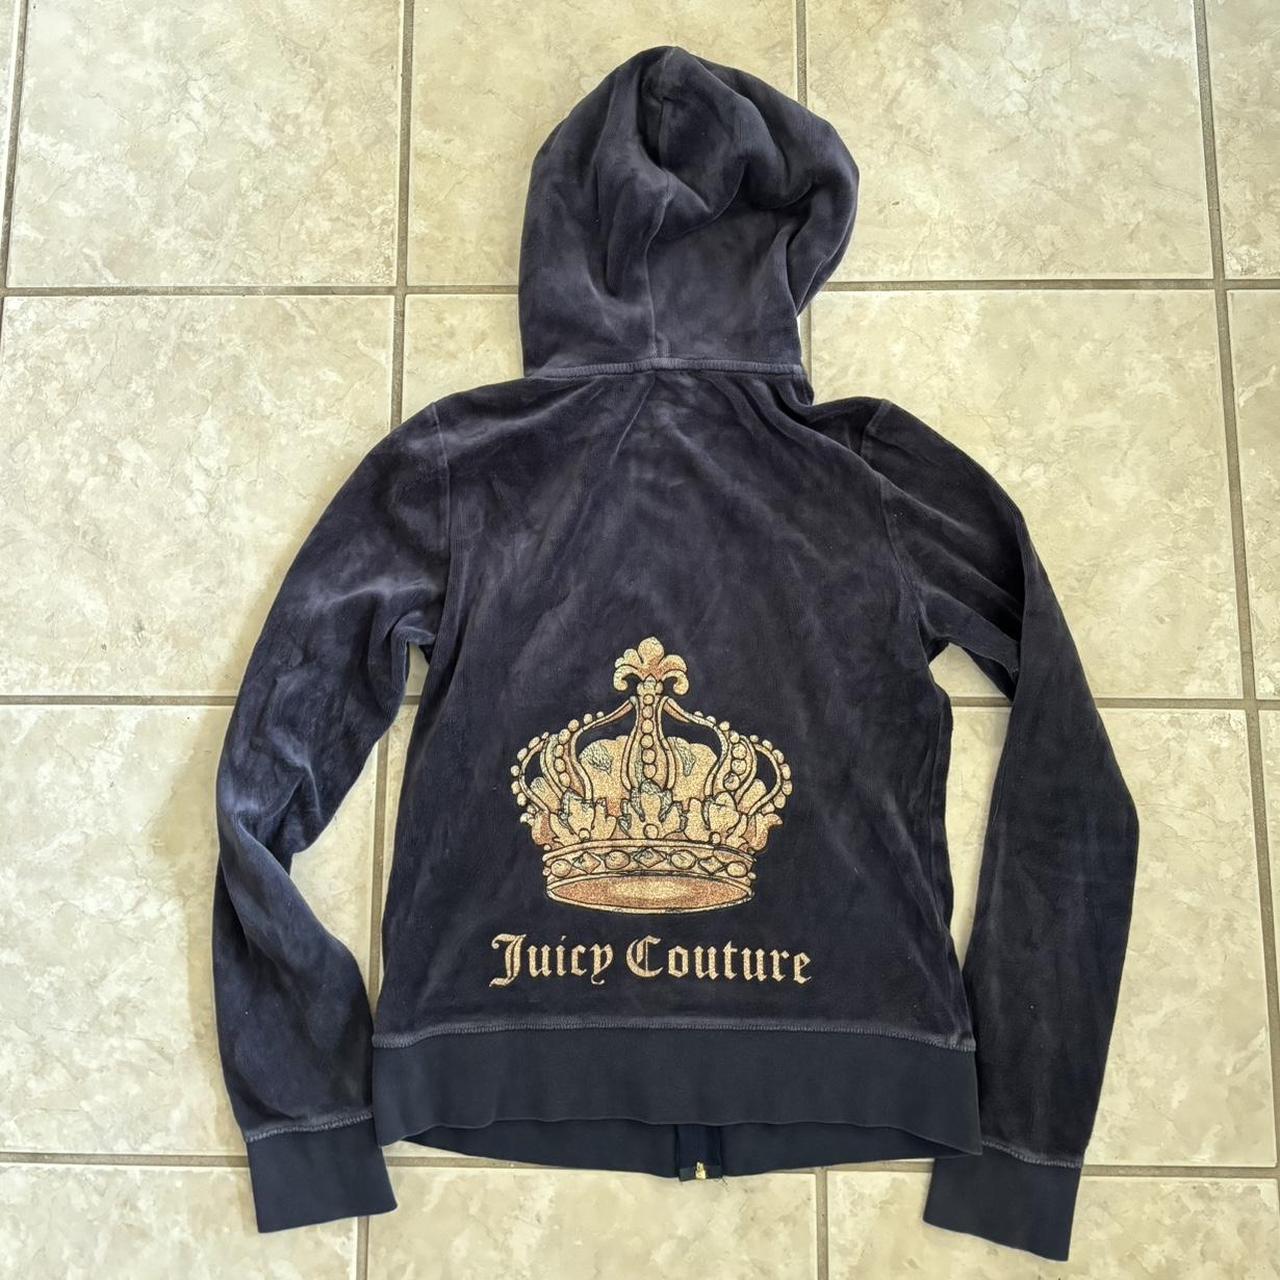 Y2K JUICY COUTURE ZIP UP!!! NO FLAWS AND HAS THAT... - Depop